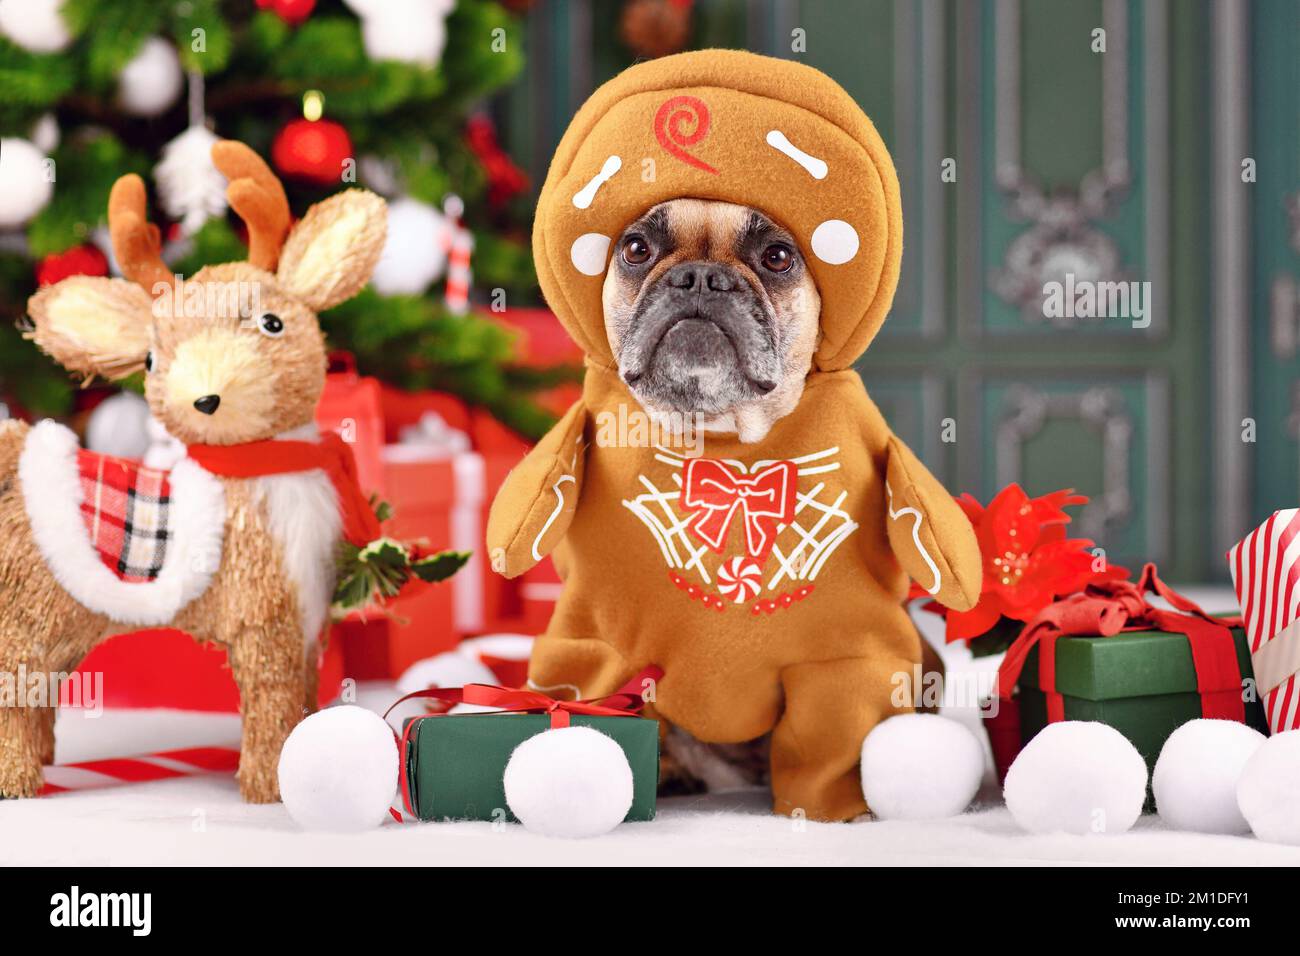 Funny French Bulldog wearing gingerbread Christmas costume with arms surrounded by festive decoration Stock Photo